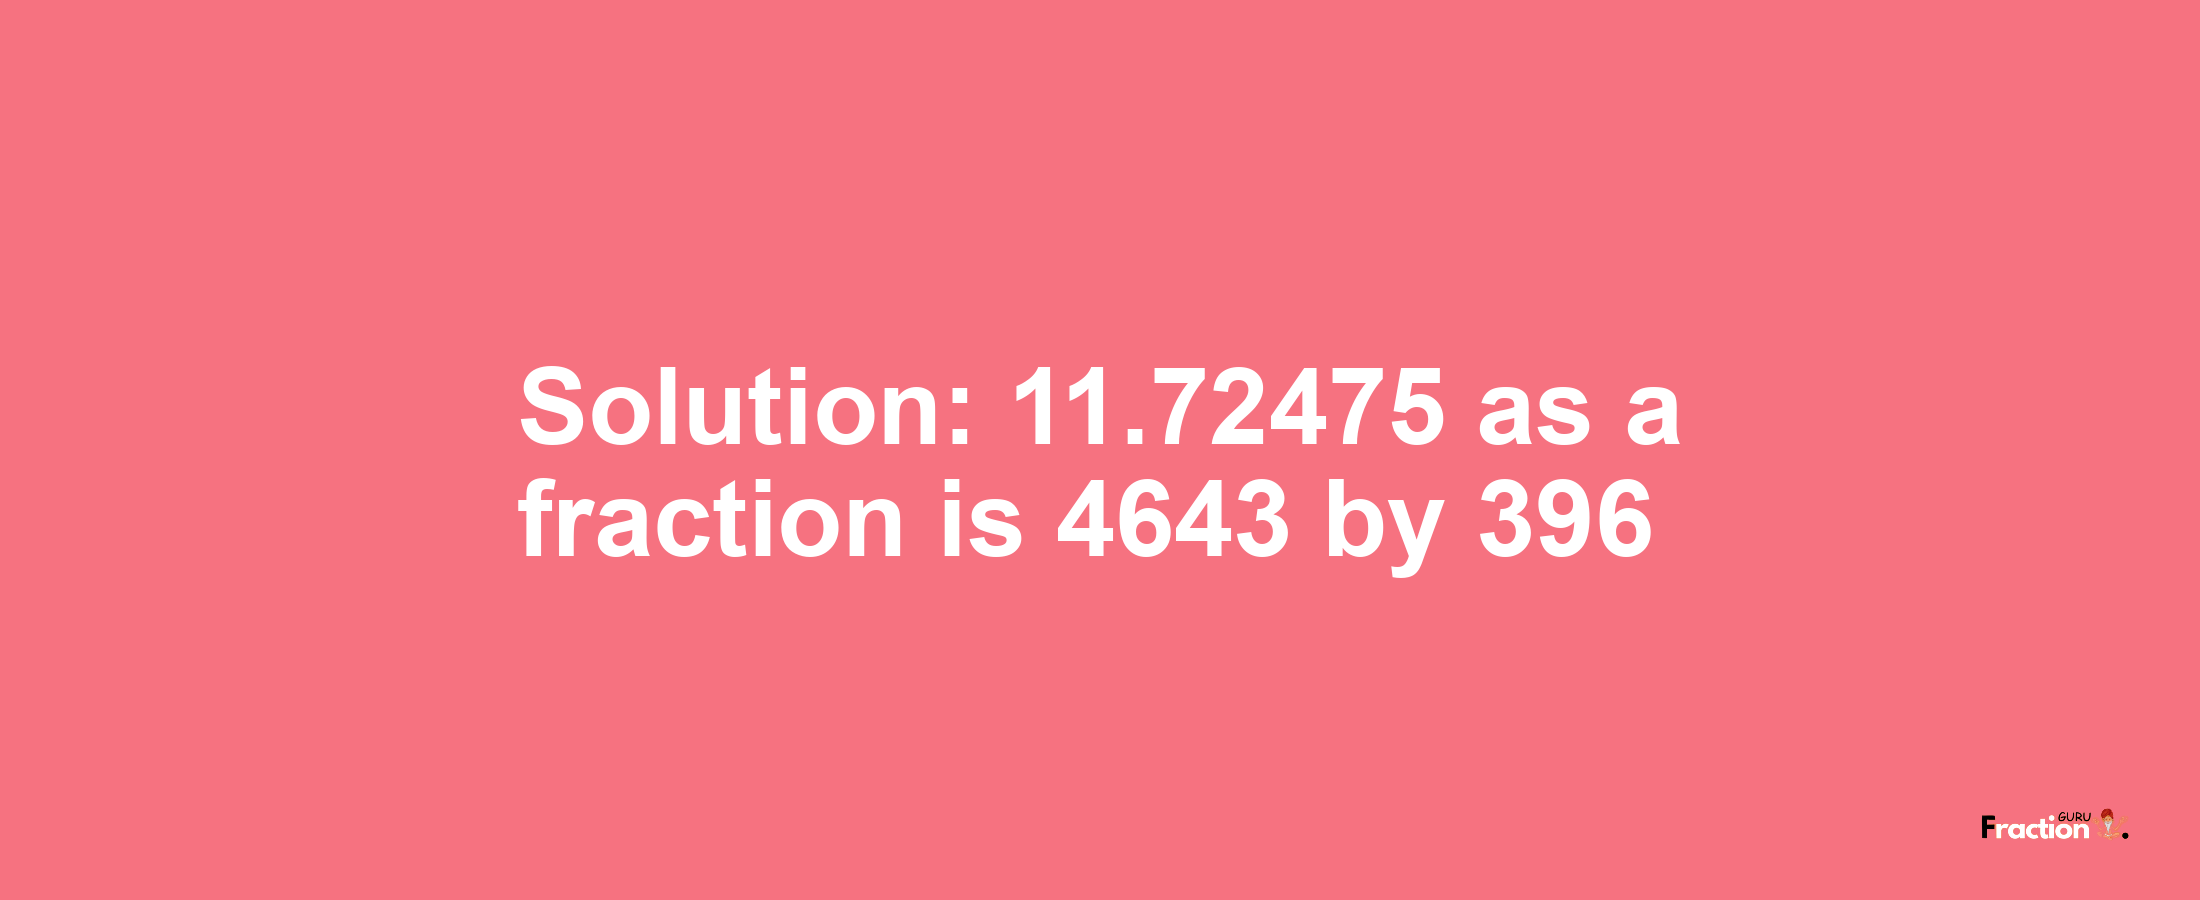 Solution:11.72475 as a fraction is 4643/396